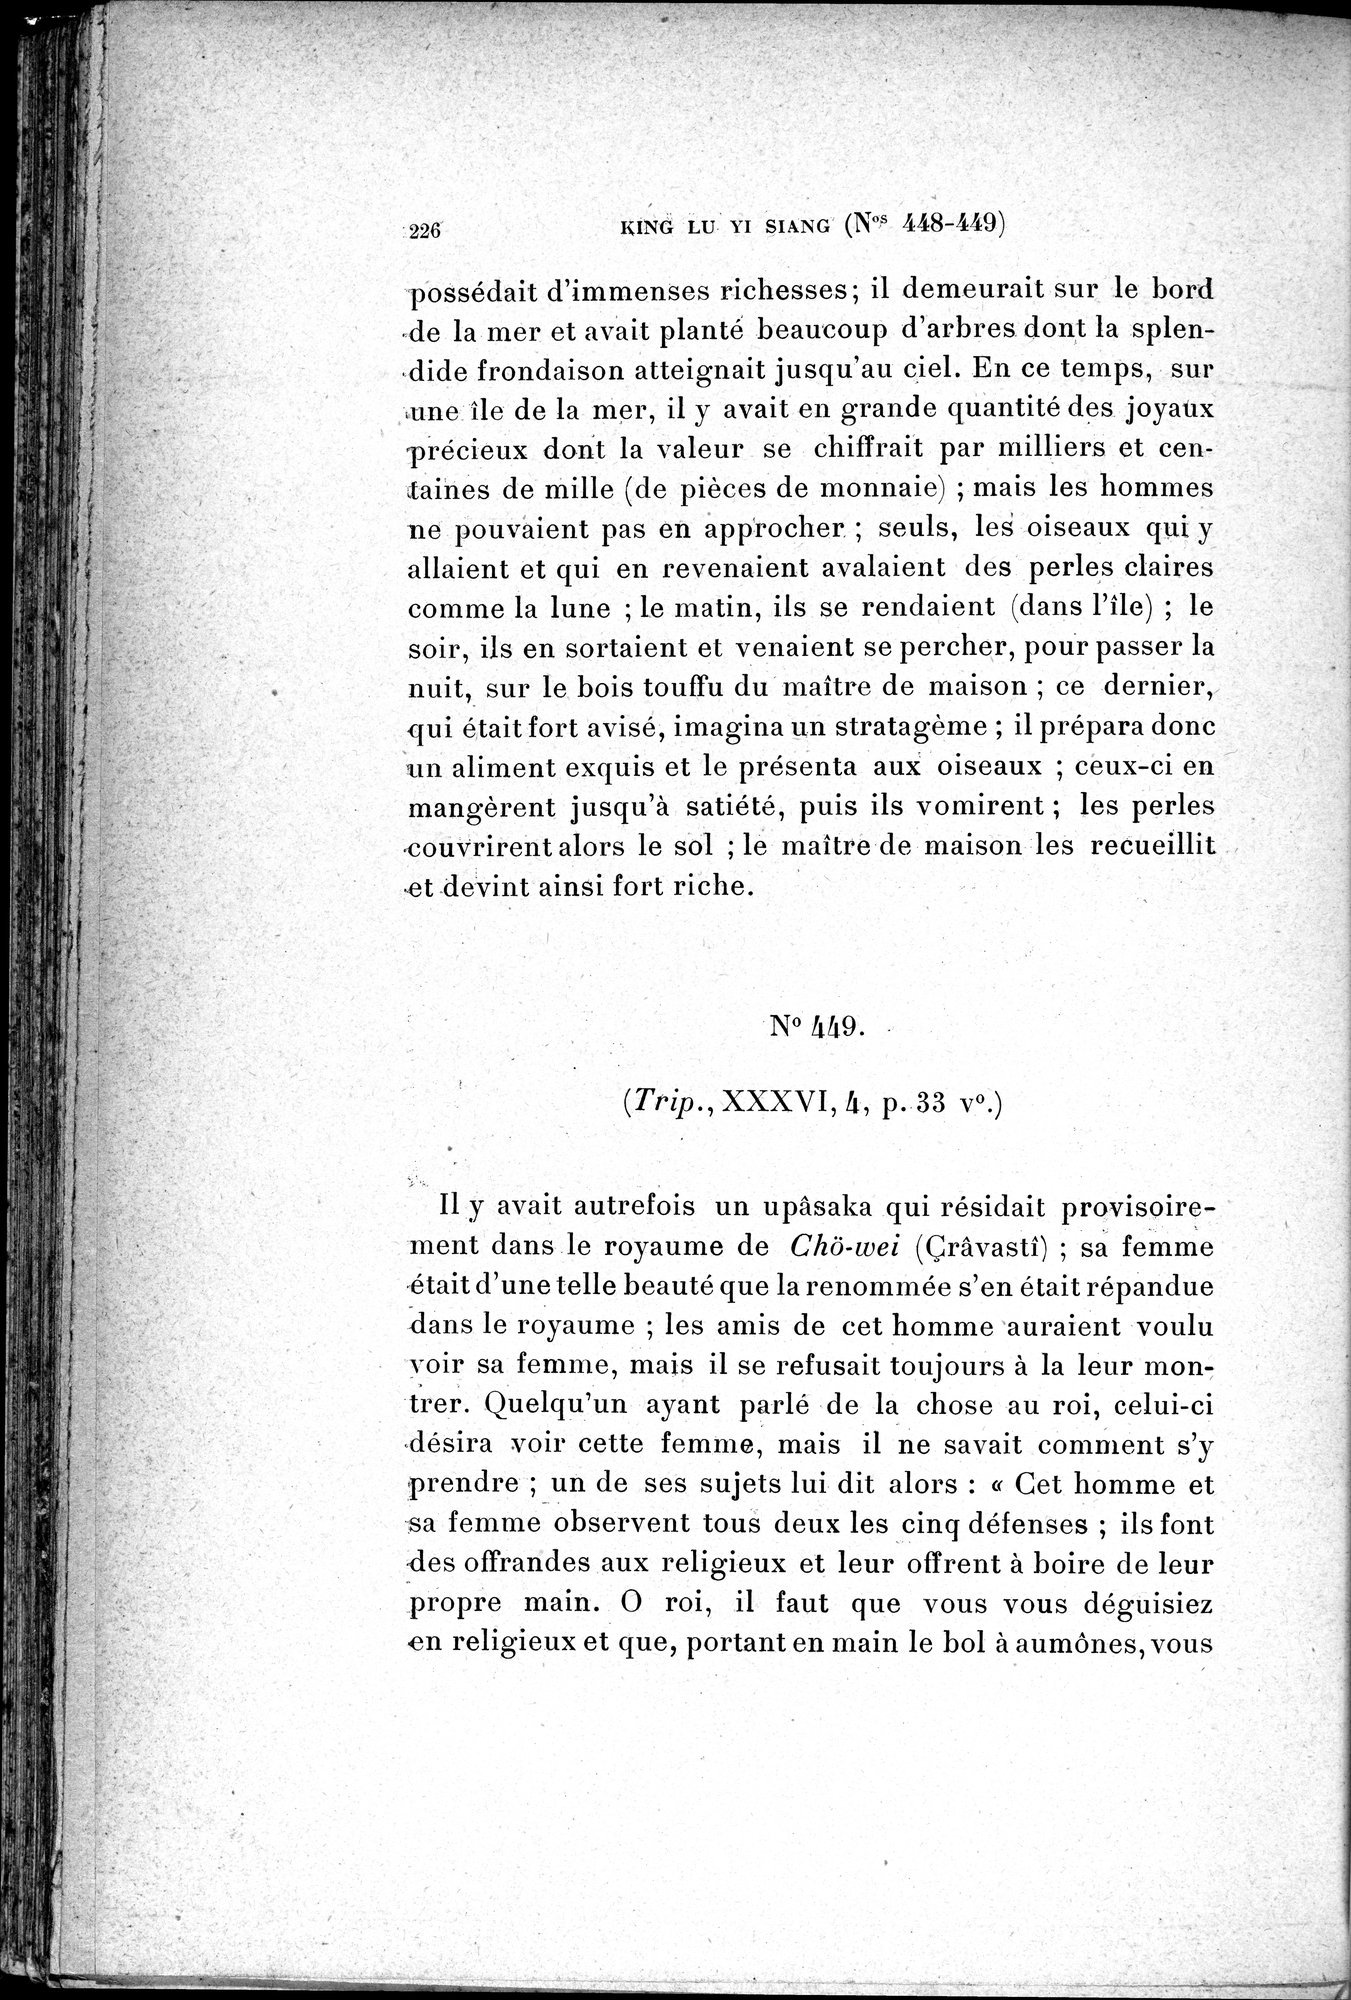 Cinq Cents Contes et Apologues : vol.3 / Page 240 (Grayscale High Resolution Image)